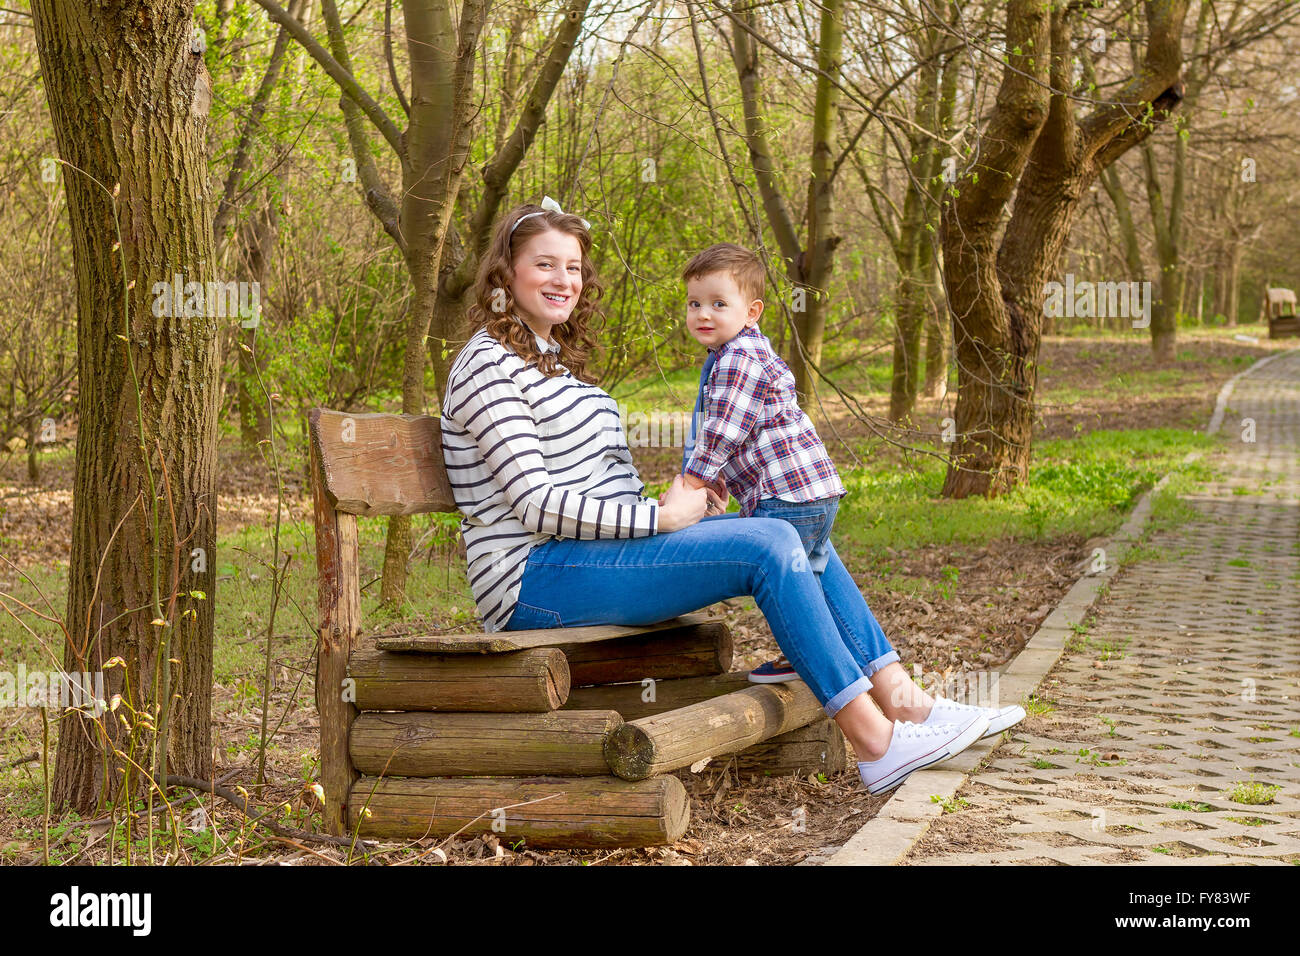 Beautiful pregnant woman outdoor with her little boy in the park on bench. Stock Photo